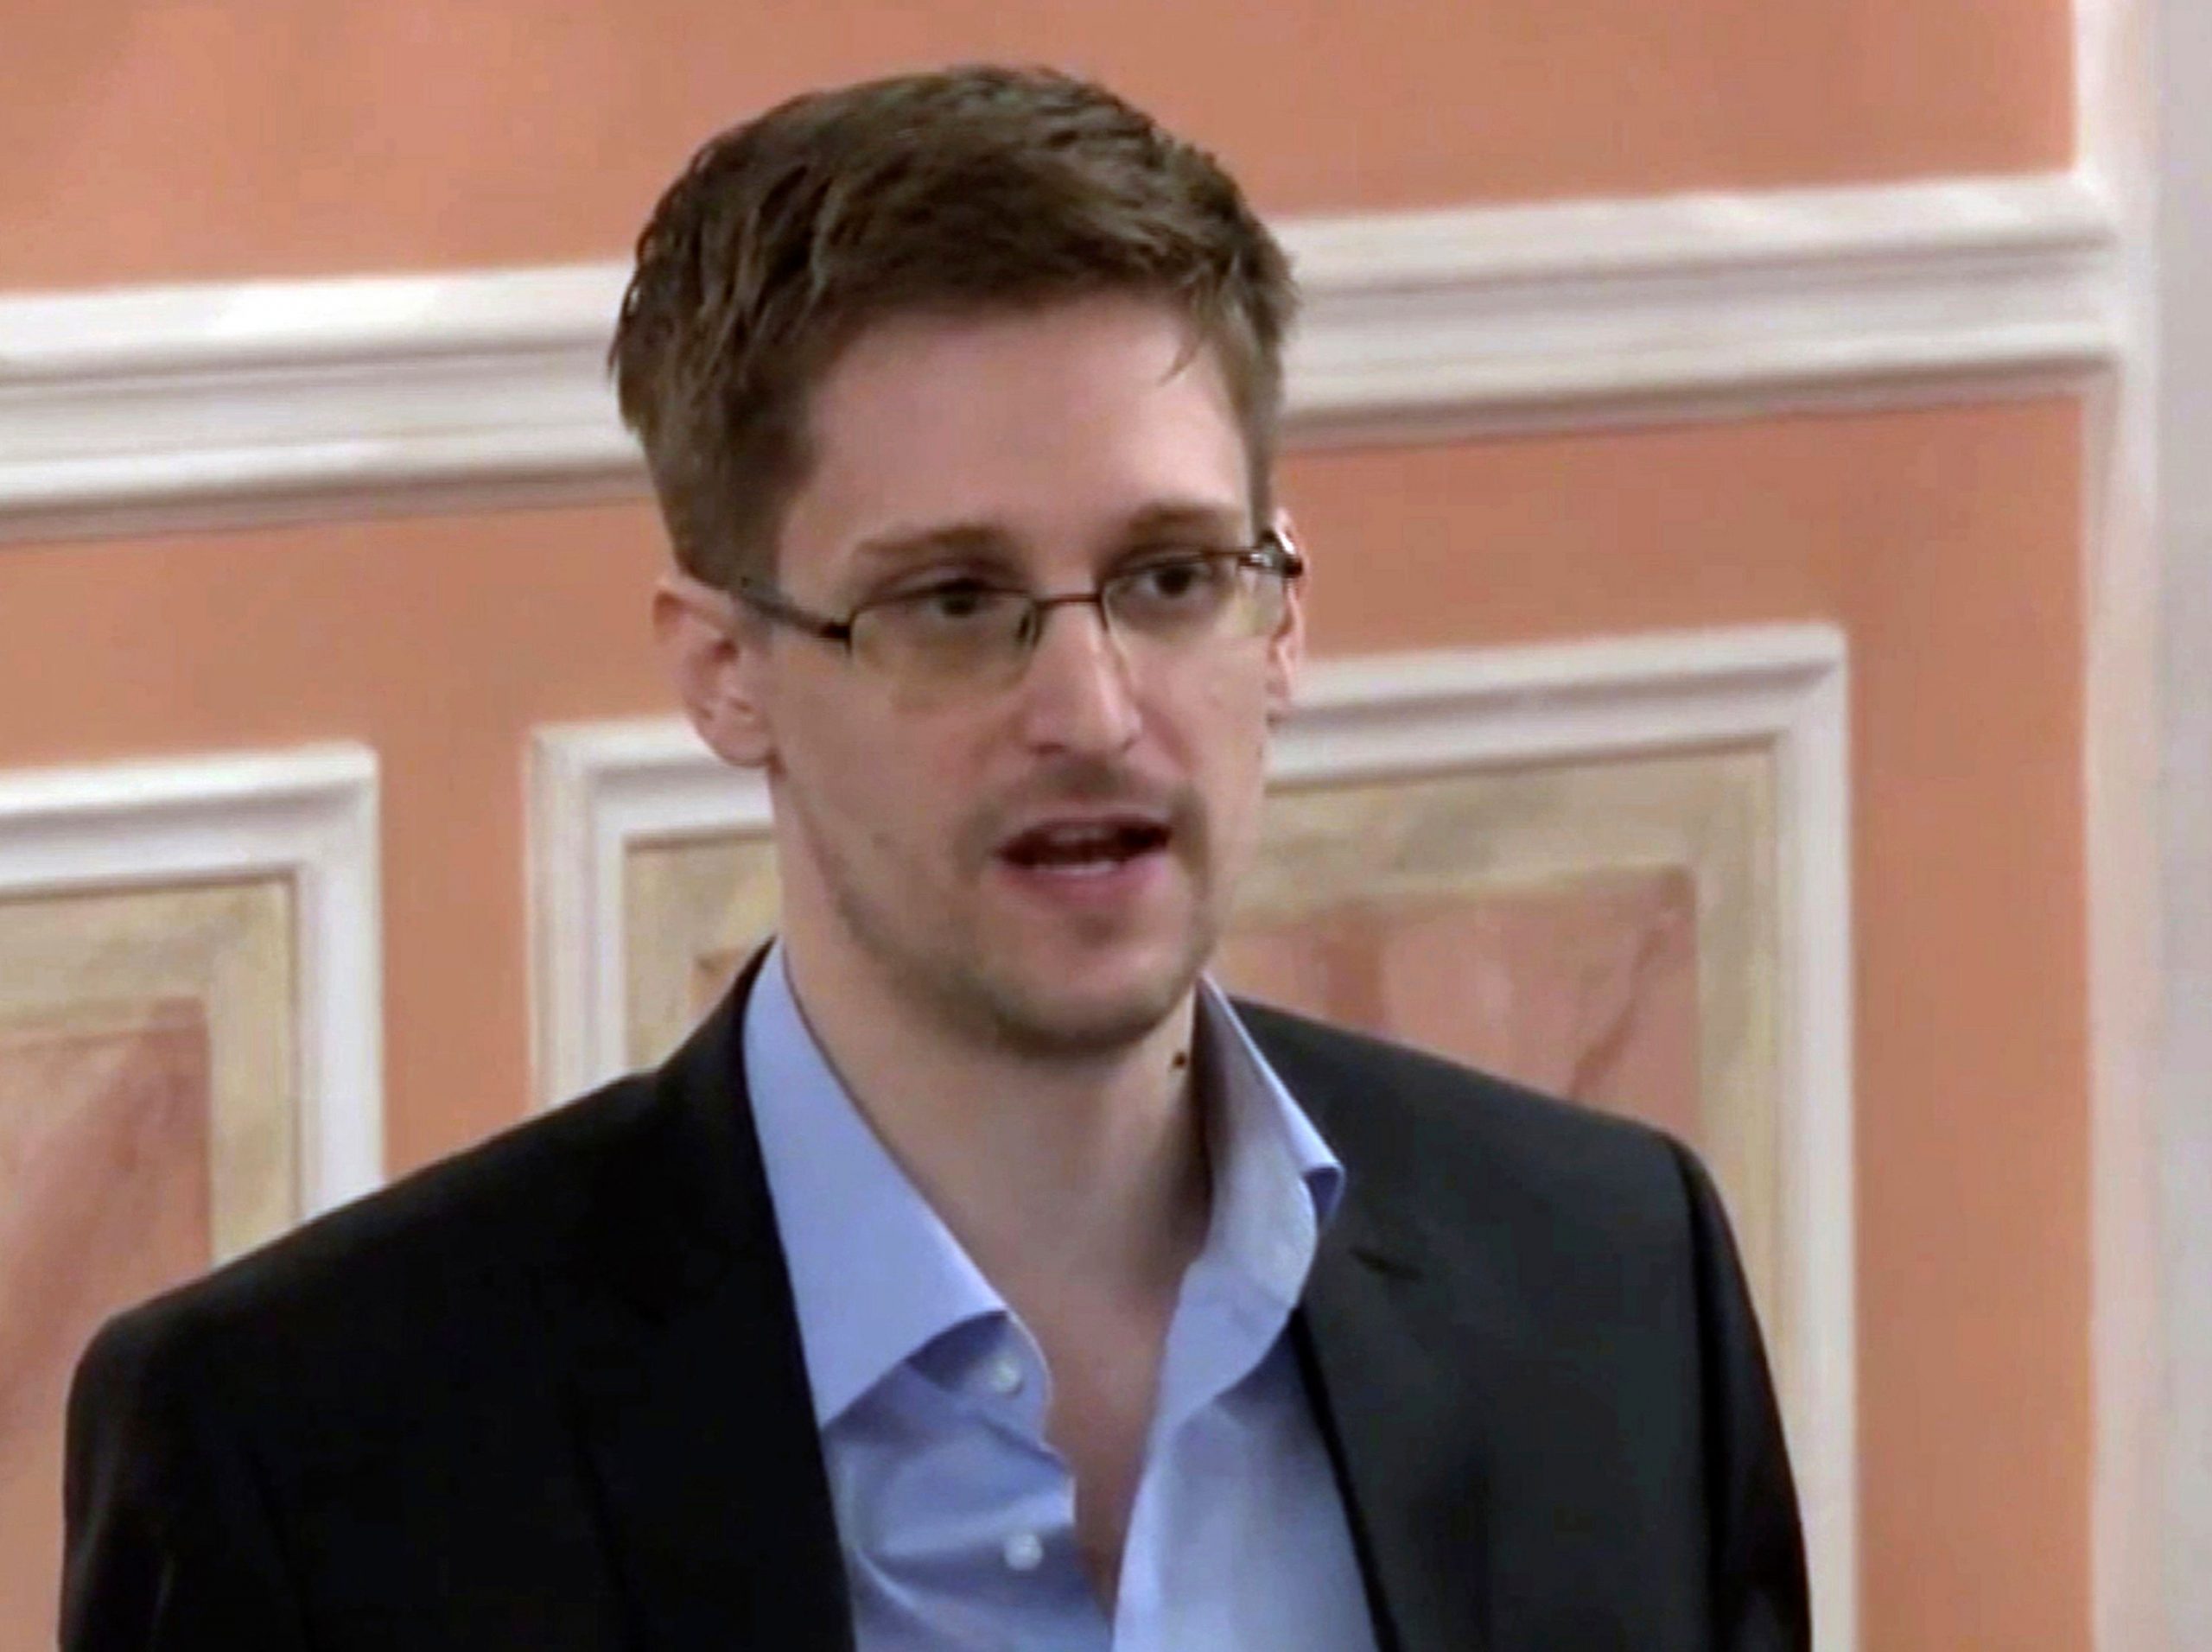 Edward Snowden on his website: The CIA is not your friend